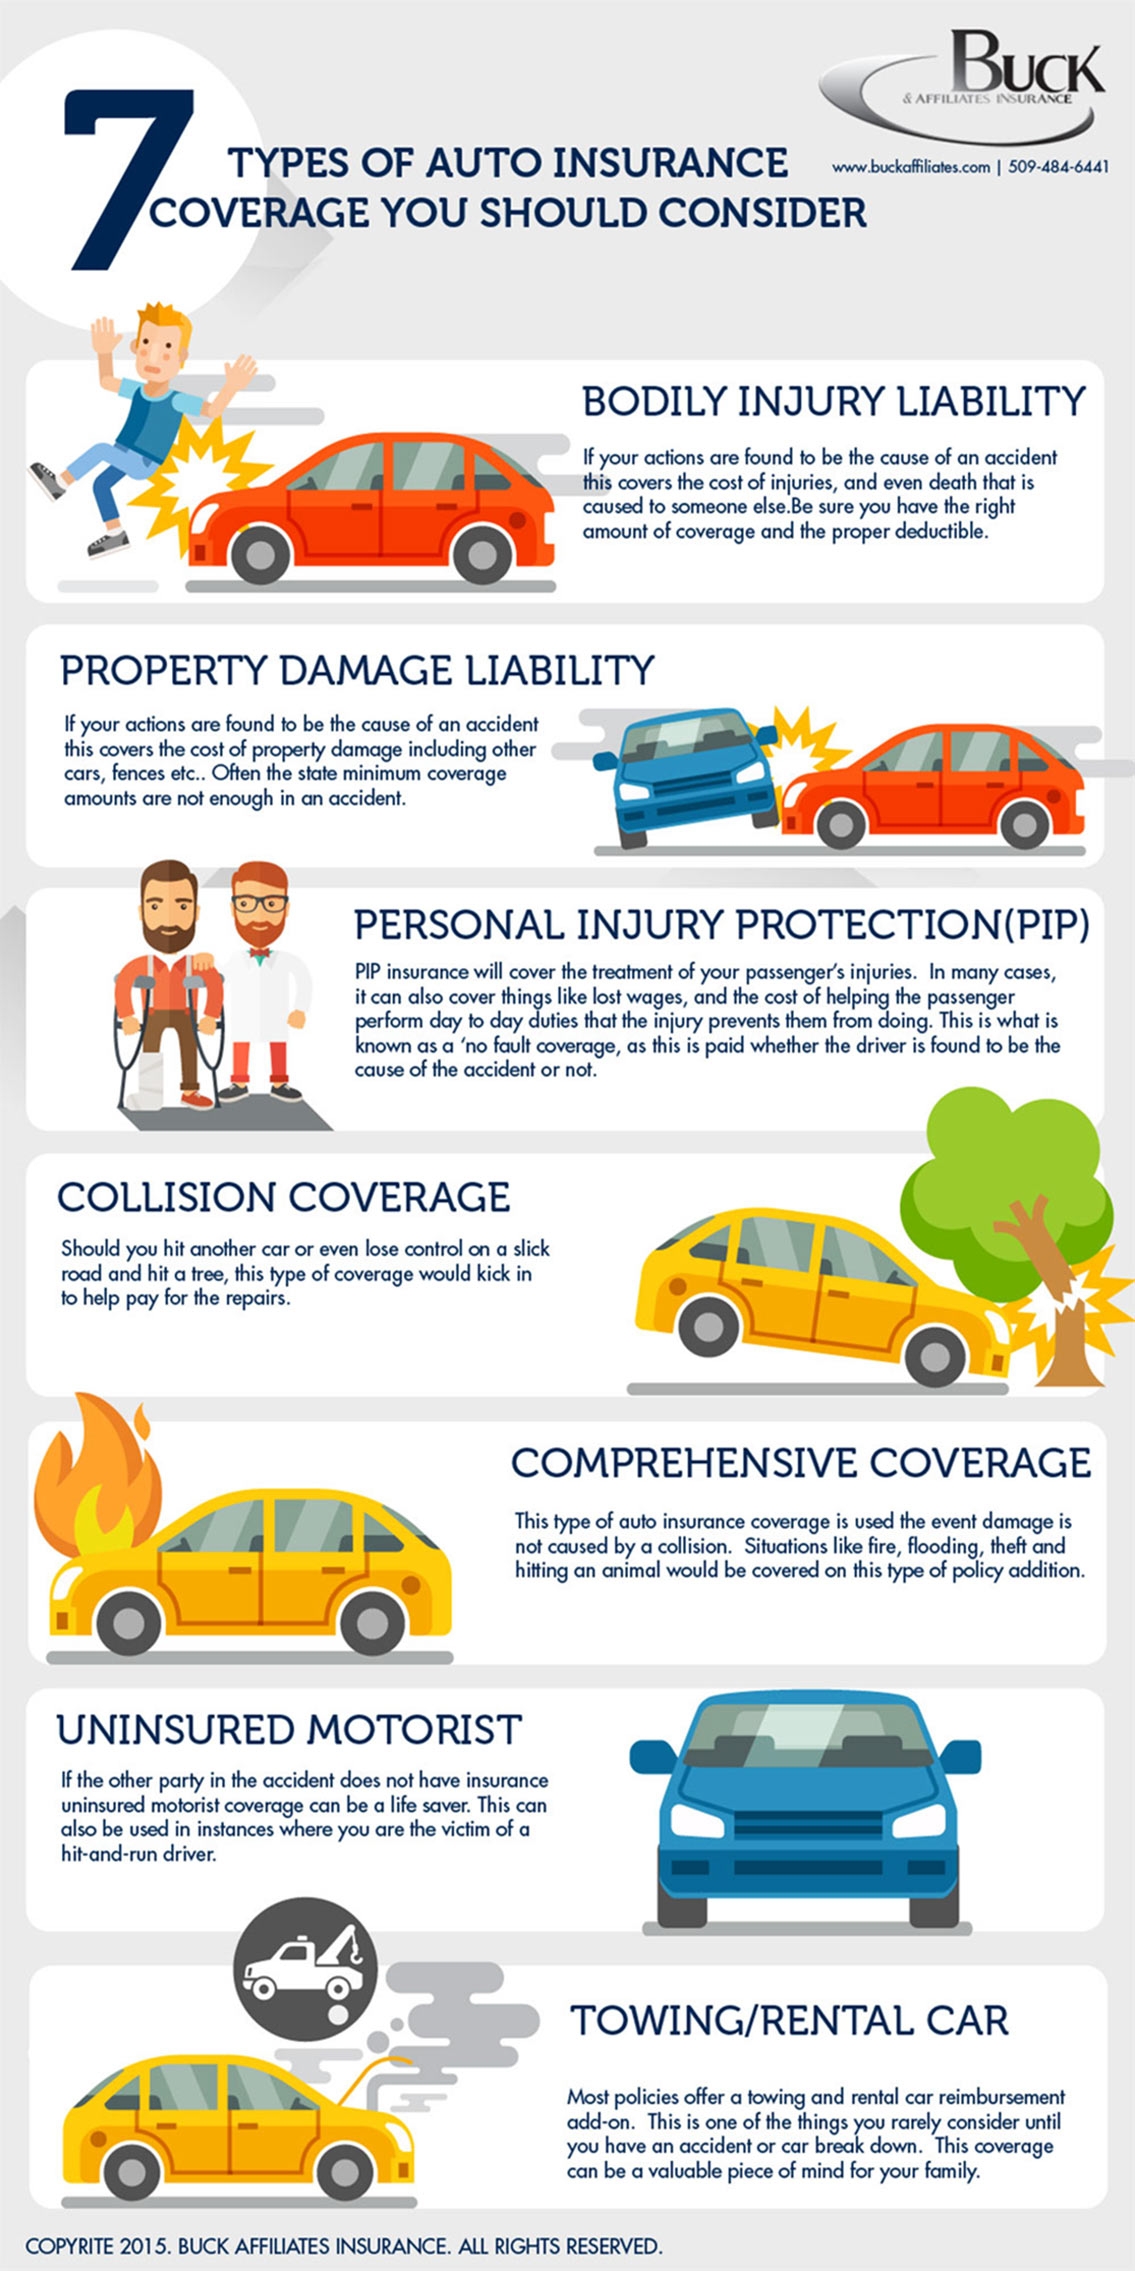 7 Types of Car Insurance You Should Consider [Infographic]